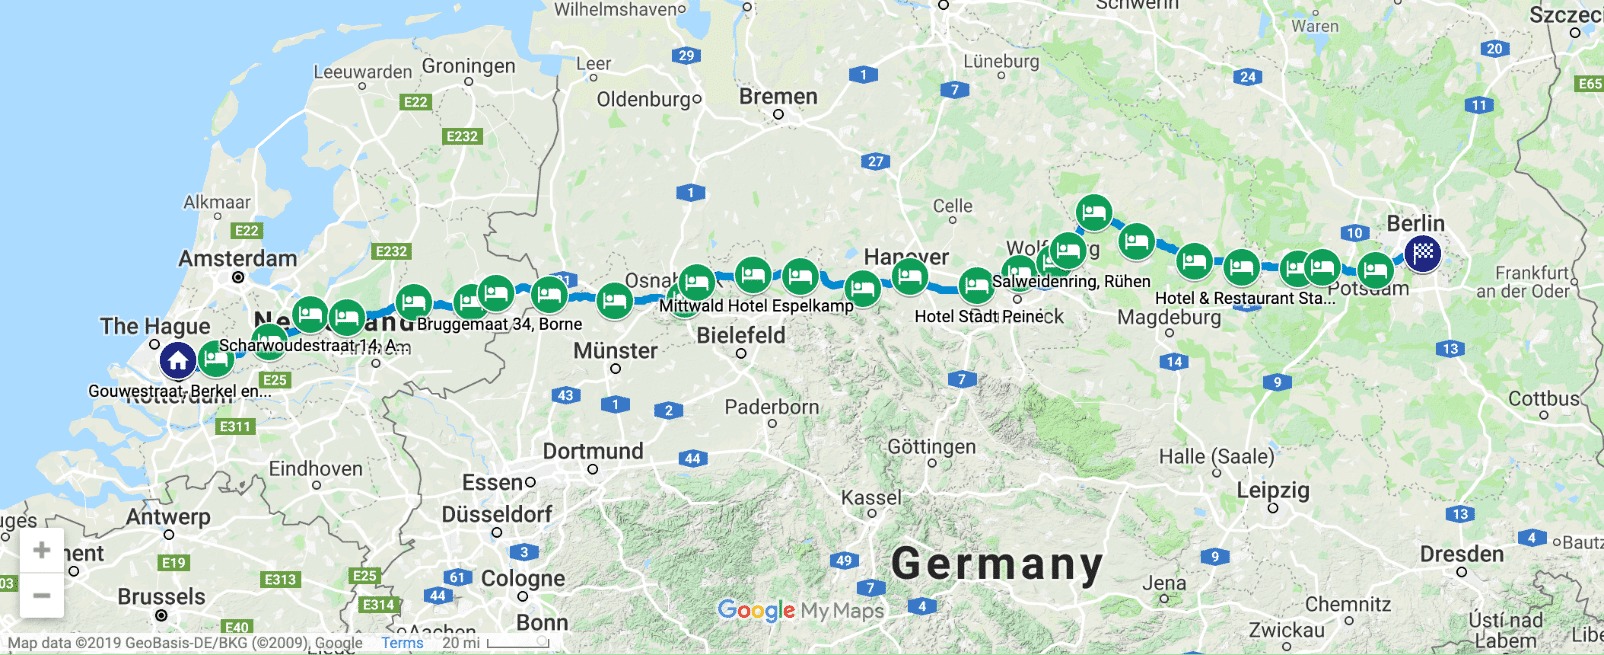 Walk to WordCamp Europe route